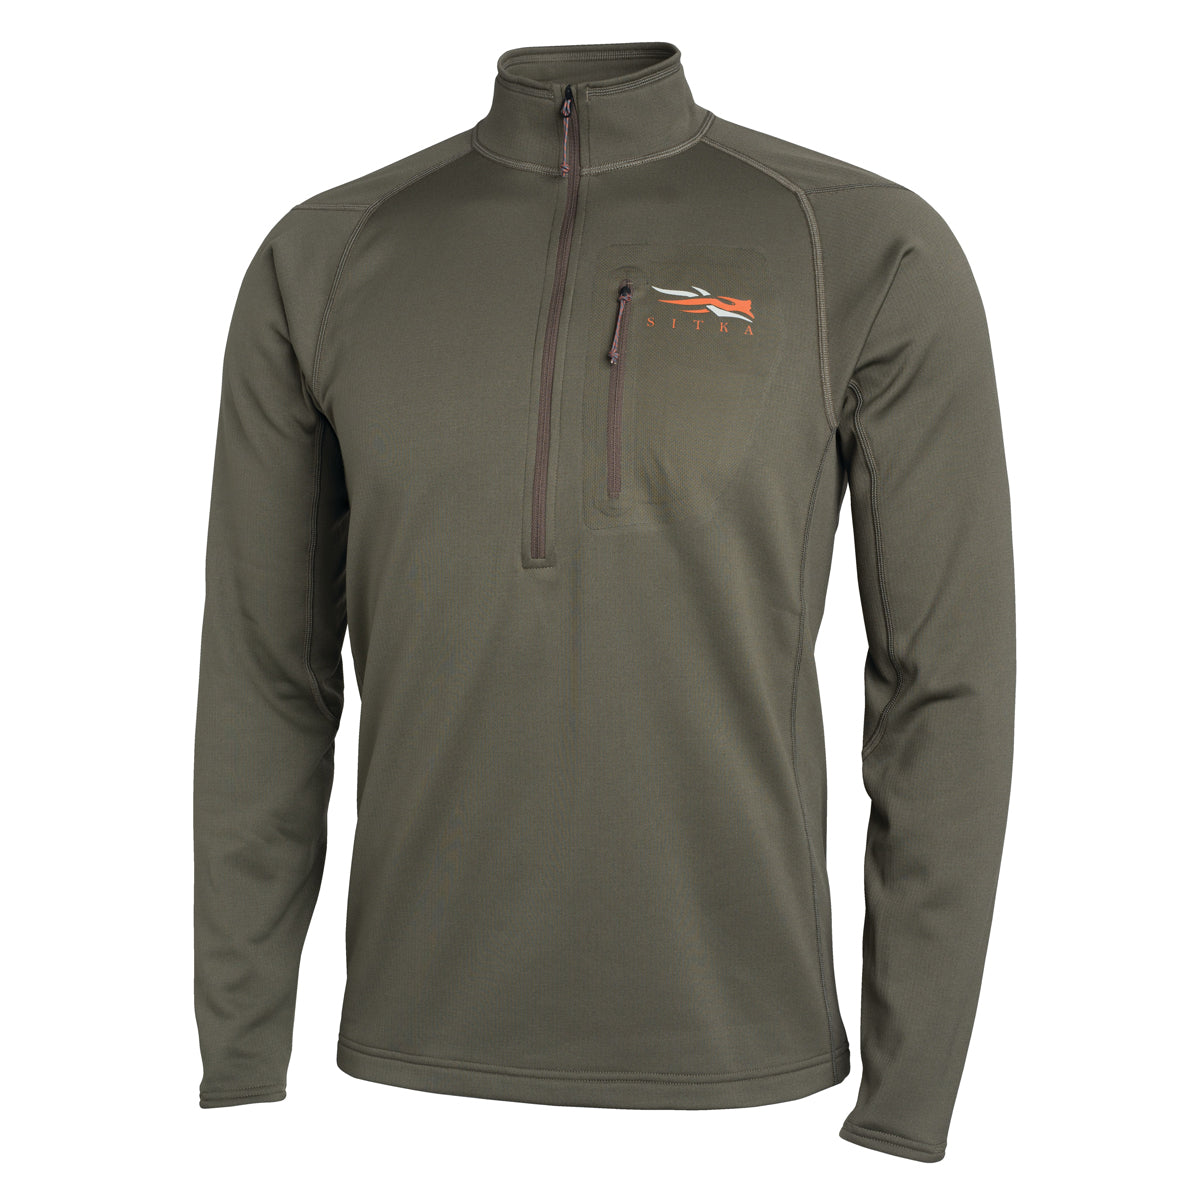 Sitka Core Midweight Zip-T in Sitka Core Midweight Zip-T by Sitka | Apparel - goHUNT Shop by GOHUNT | Sitka - GOHUNT Shop